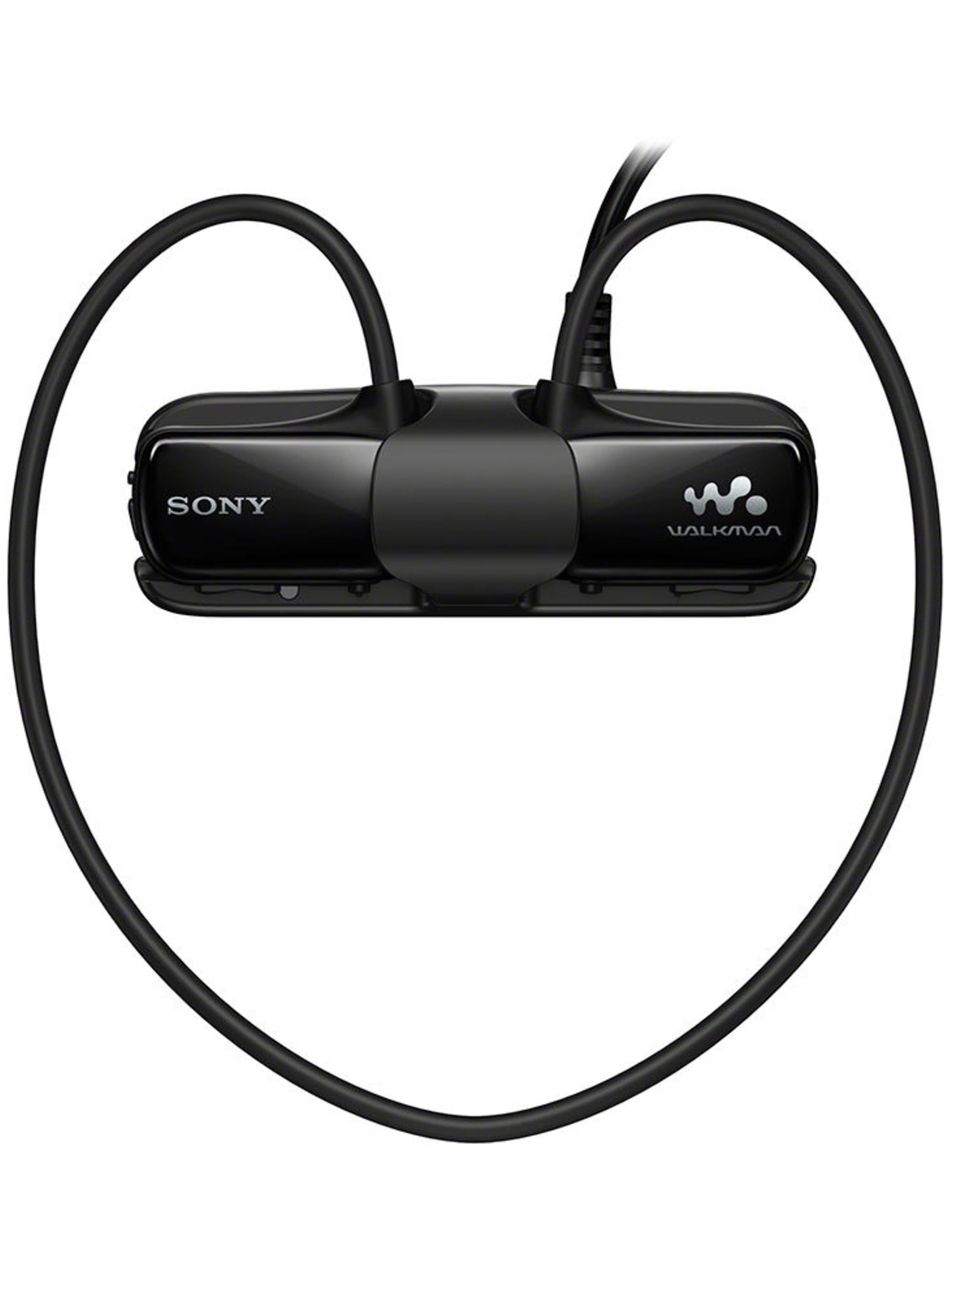 <p><a href="http://www.sony.co.uk/electronics/walkman/nwz-w273-nwz-w274s" target="_blank">Waterproof Walkman £59 </a></p>

<p>Simply sync and plug in. This wireless headset suits stores 8GB of music, is totally waterproof  you can swim with it, and has 8